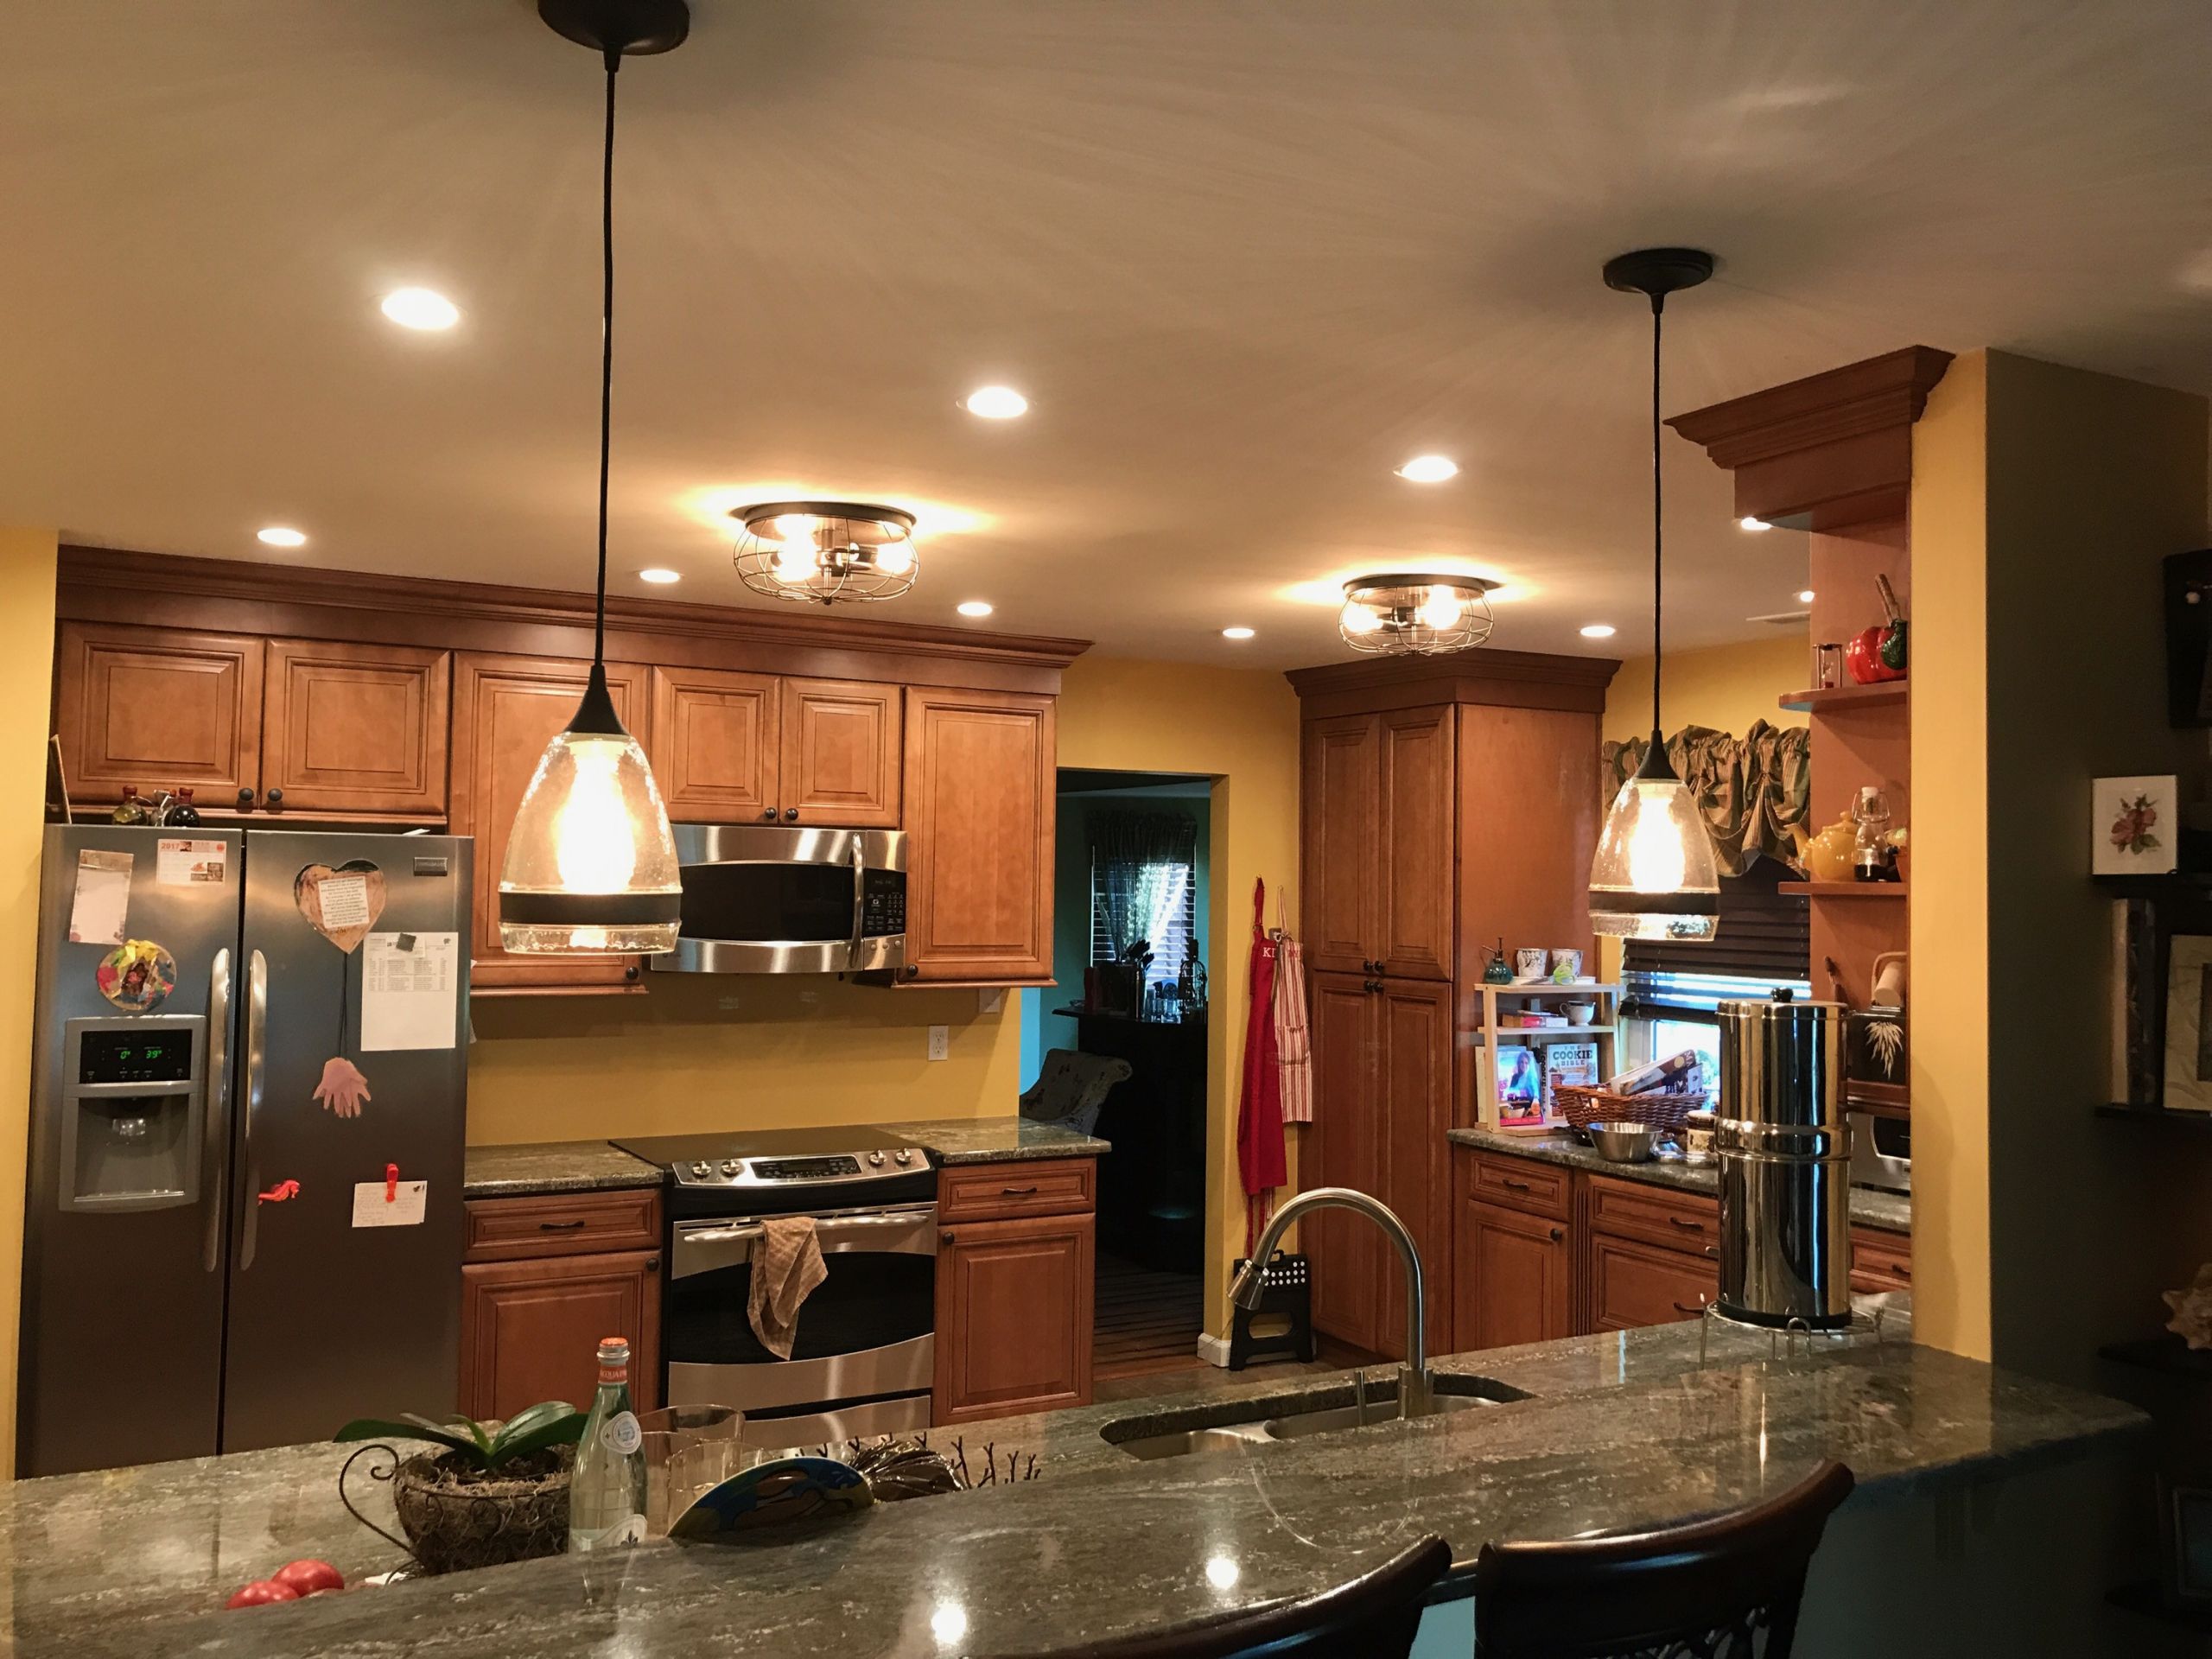 1950'S Kitchen Light Fixtures
 Kitchen Lighting Upgrades To Consider For Your Kitchen Remodel